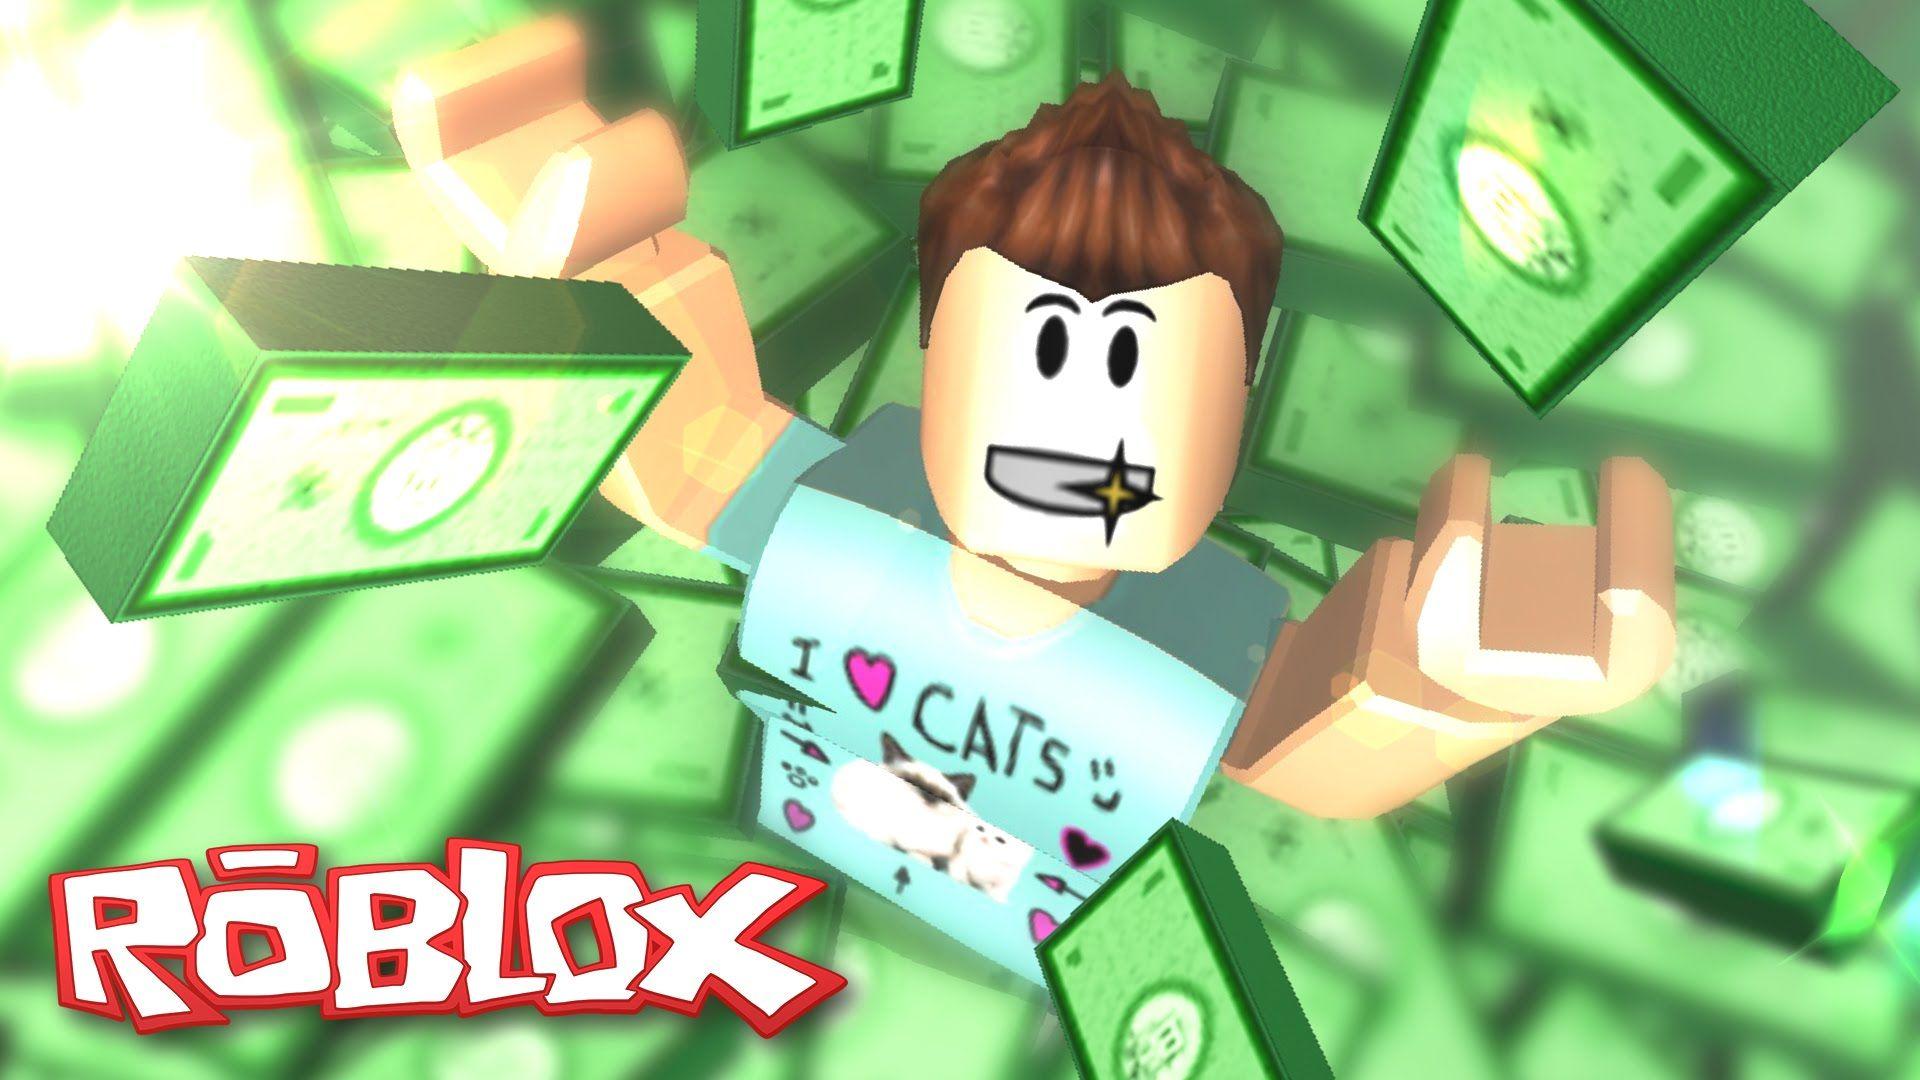 Pictures Of Deniss Roblox Character